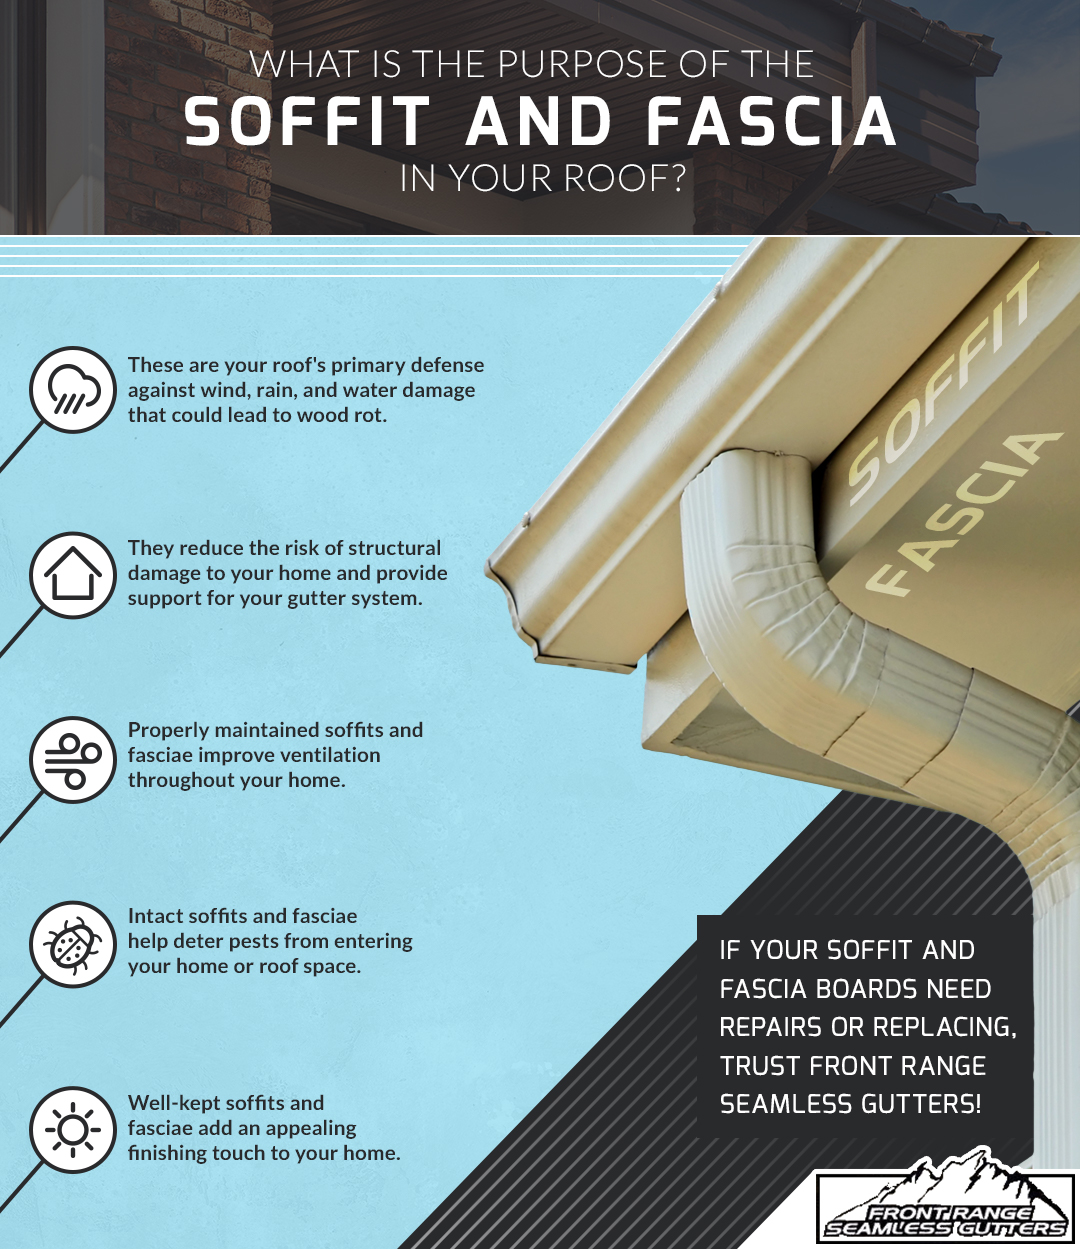 The-Purpose-of-Soffits-Fasciae-in-Your-Roof-5f2880ed00aaa